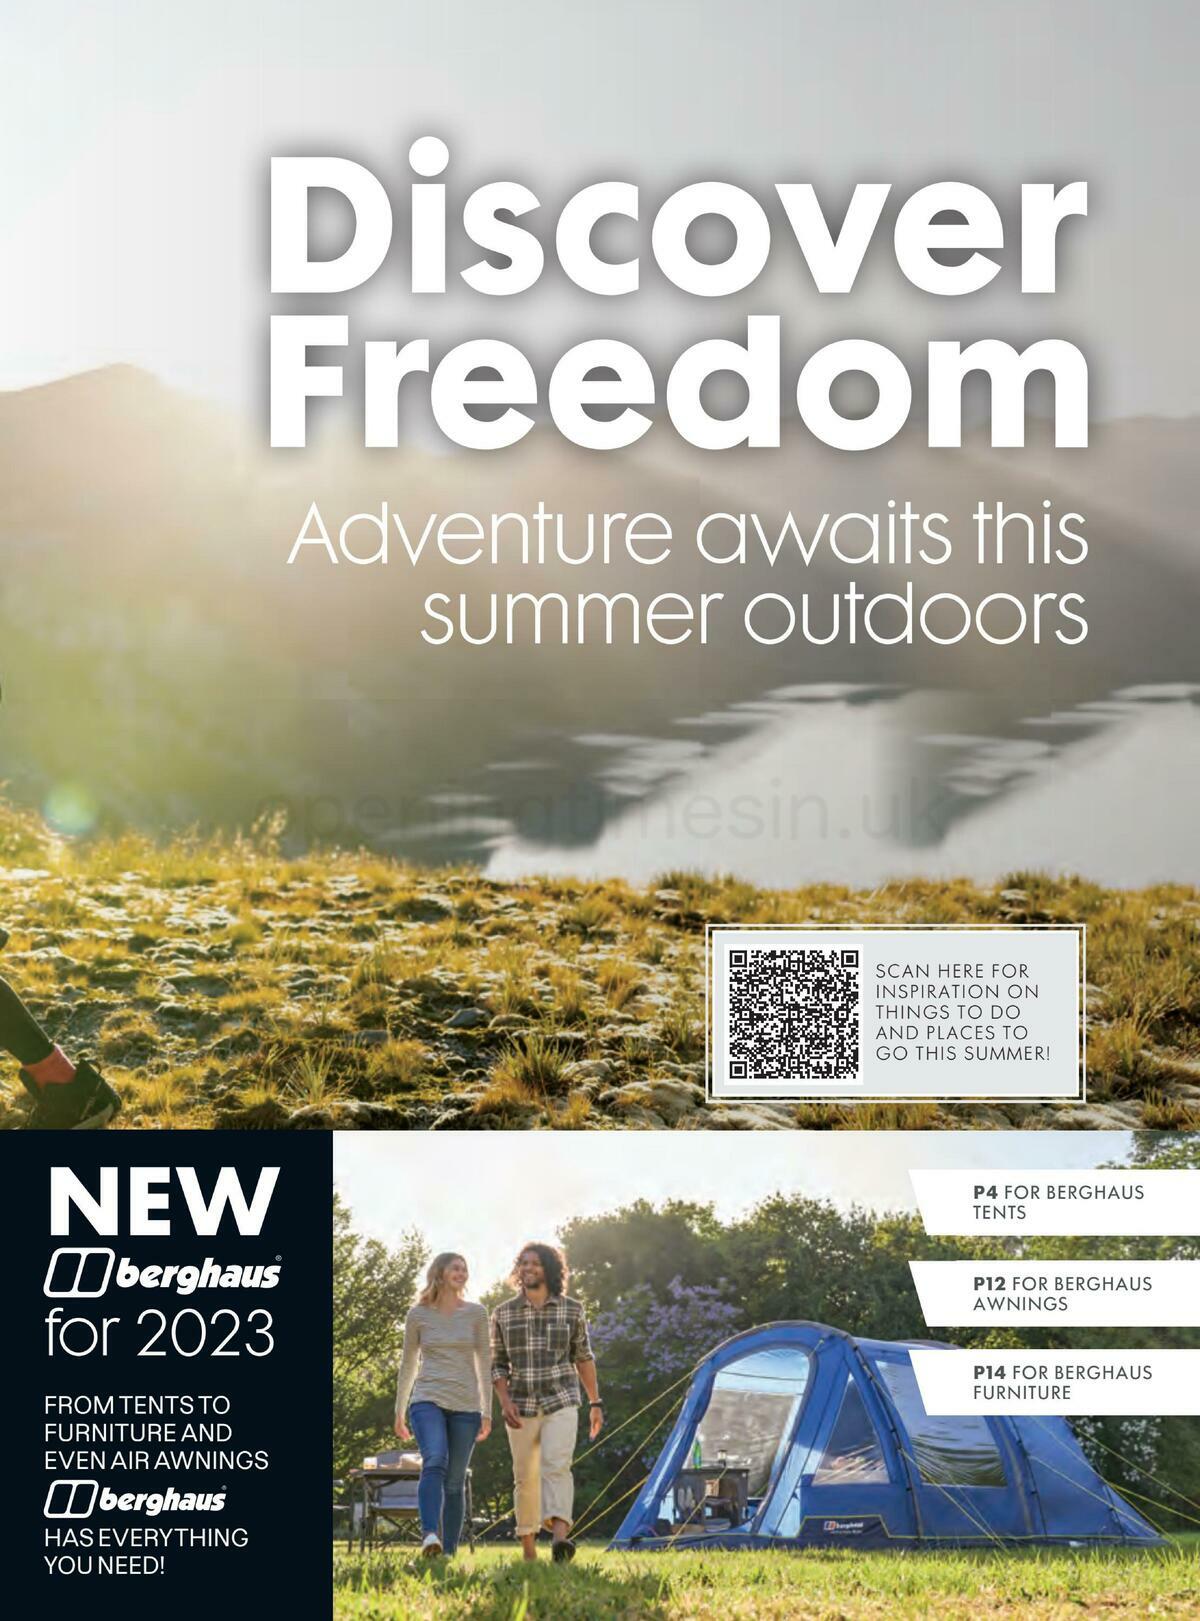 GO Outdoors Offers from 16 May